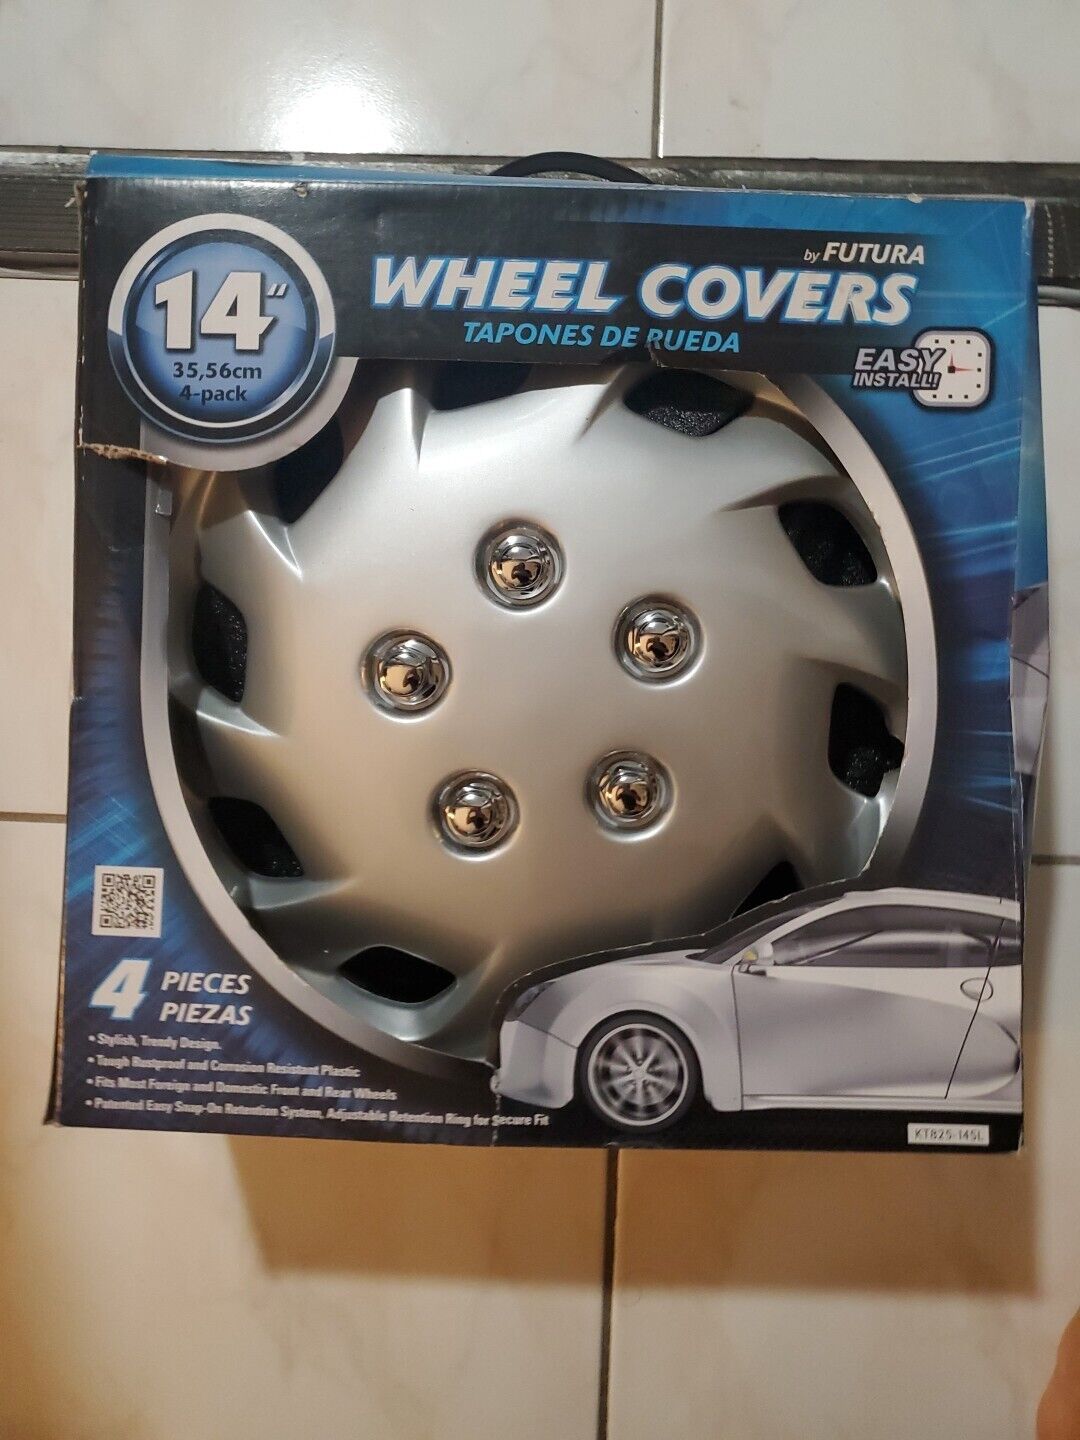 CLASSIC SERIES 14 Inch Silver Wheel Covers Vehicle Acc. Open Box By FUTURA